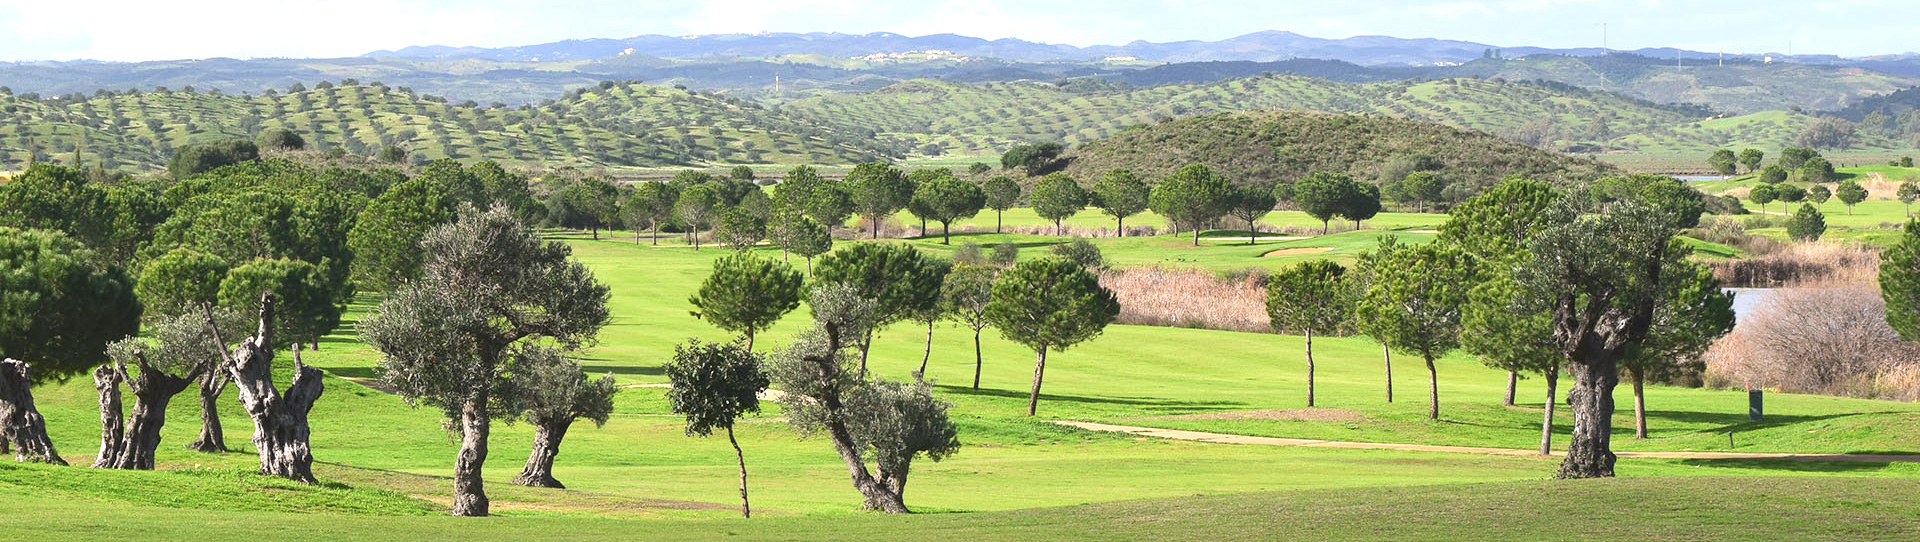 Spain golf courses - Valle Guadiana Links  - Photo 1